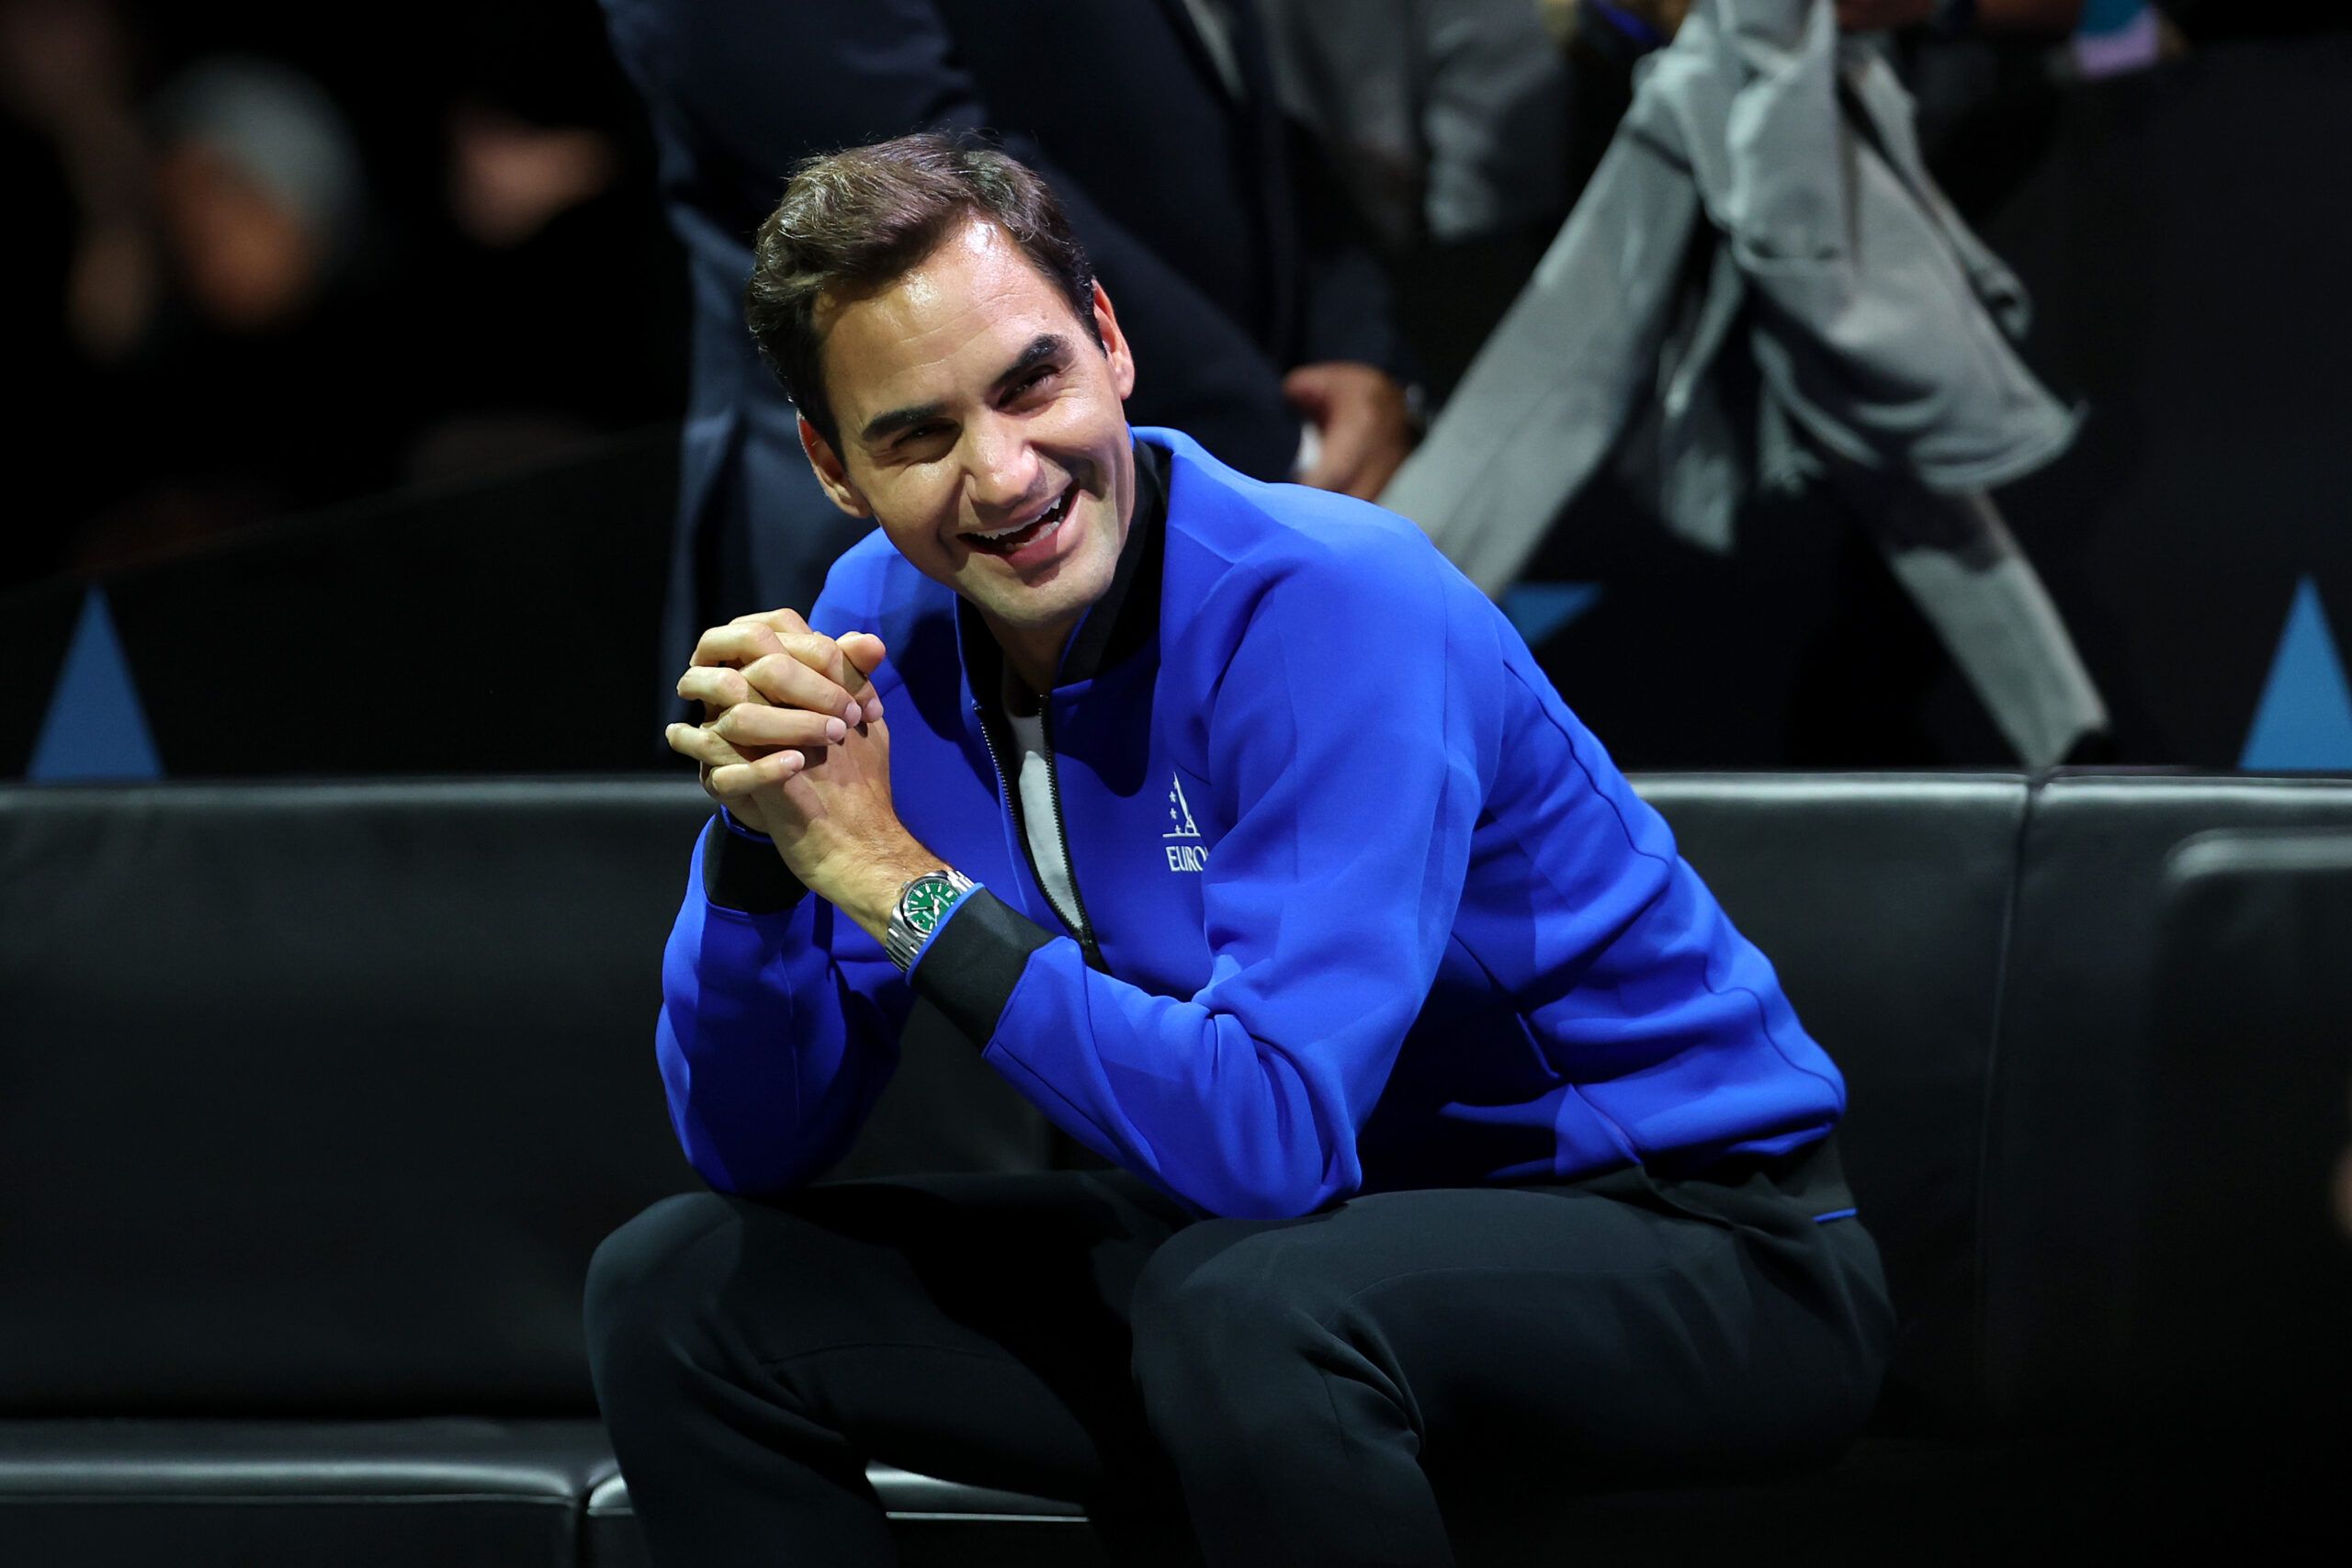 Roger Federer has a laugh at the Laver Cup